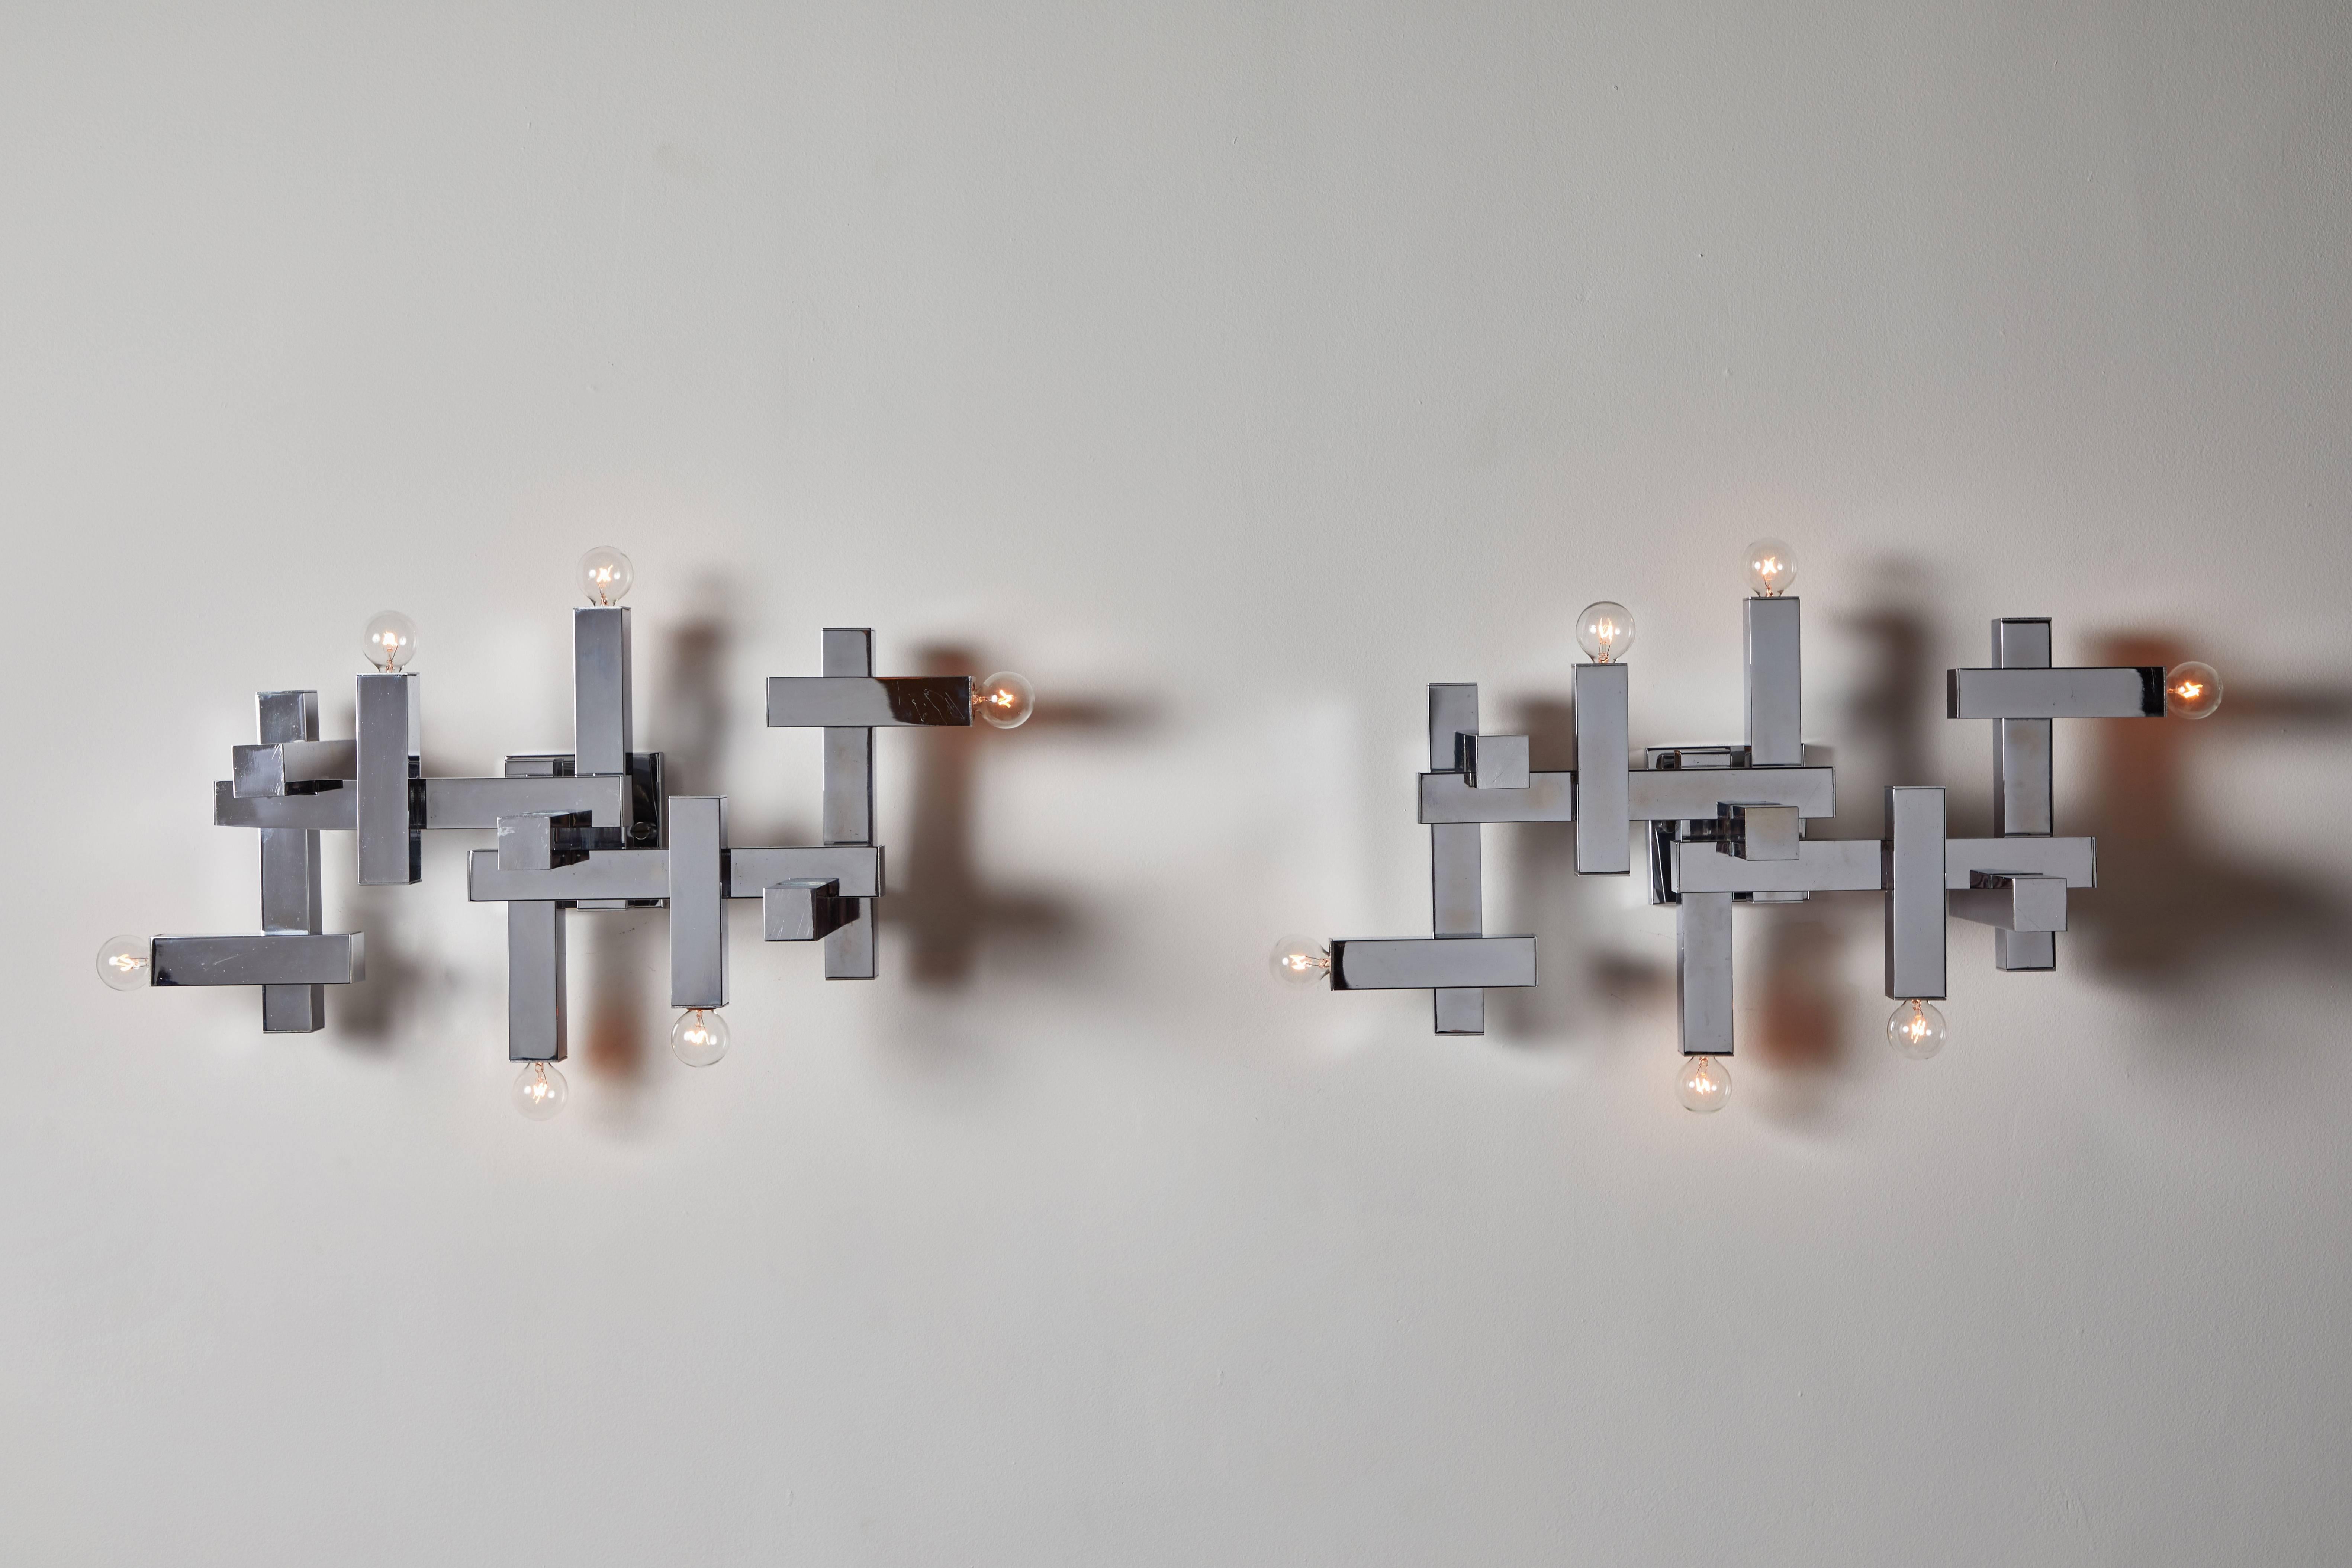 Pair of sconces by Gaetano Sciolari. Designed and manufactured in Italy, circa 1960s. Metal plated chrome. Rewired for US junction boxes. Each light takes six 25w maximum American candelabra bulbs.